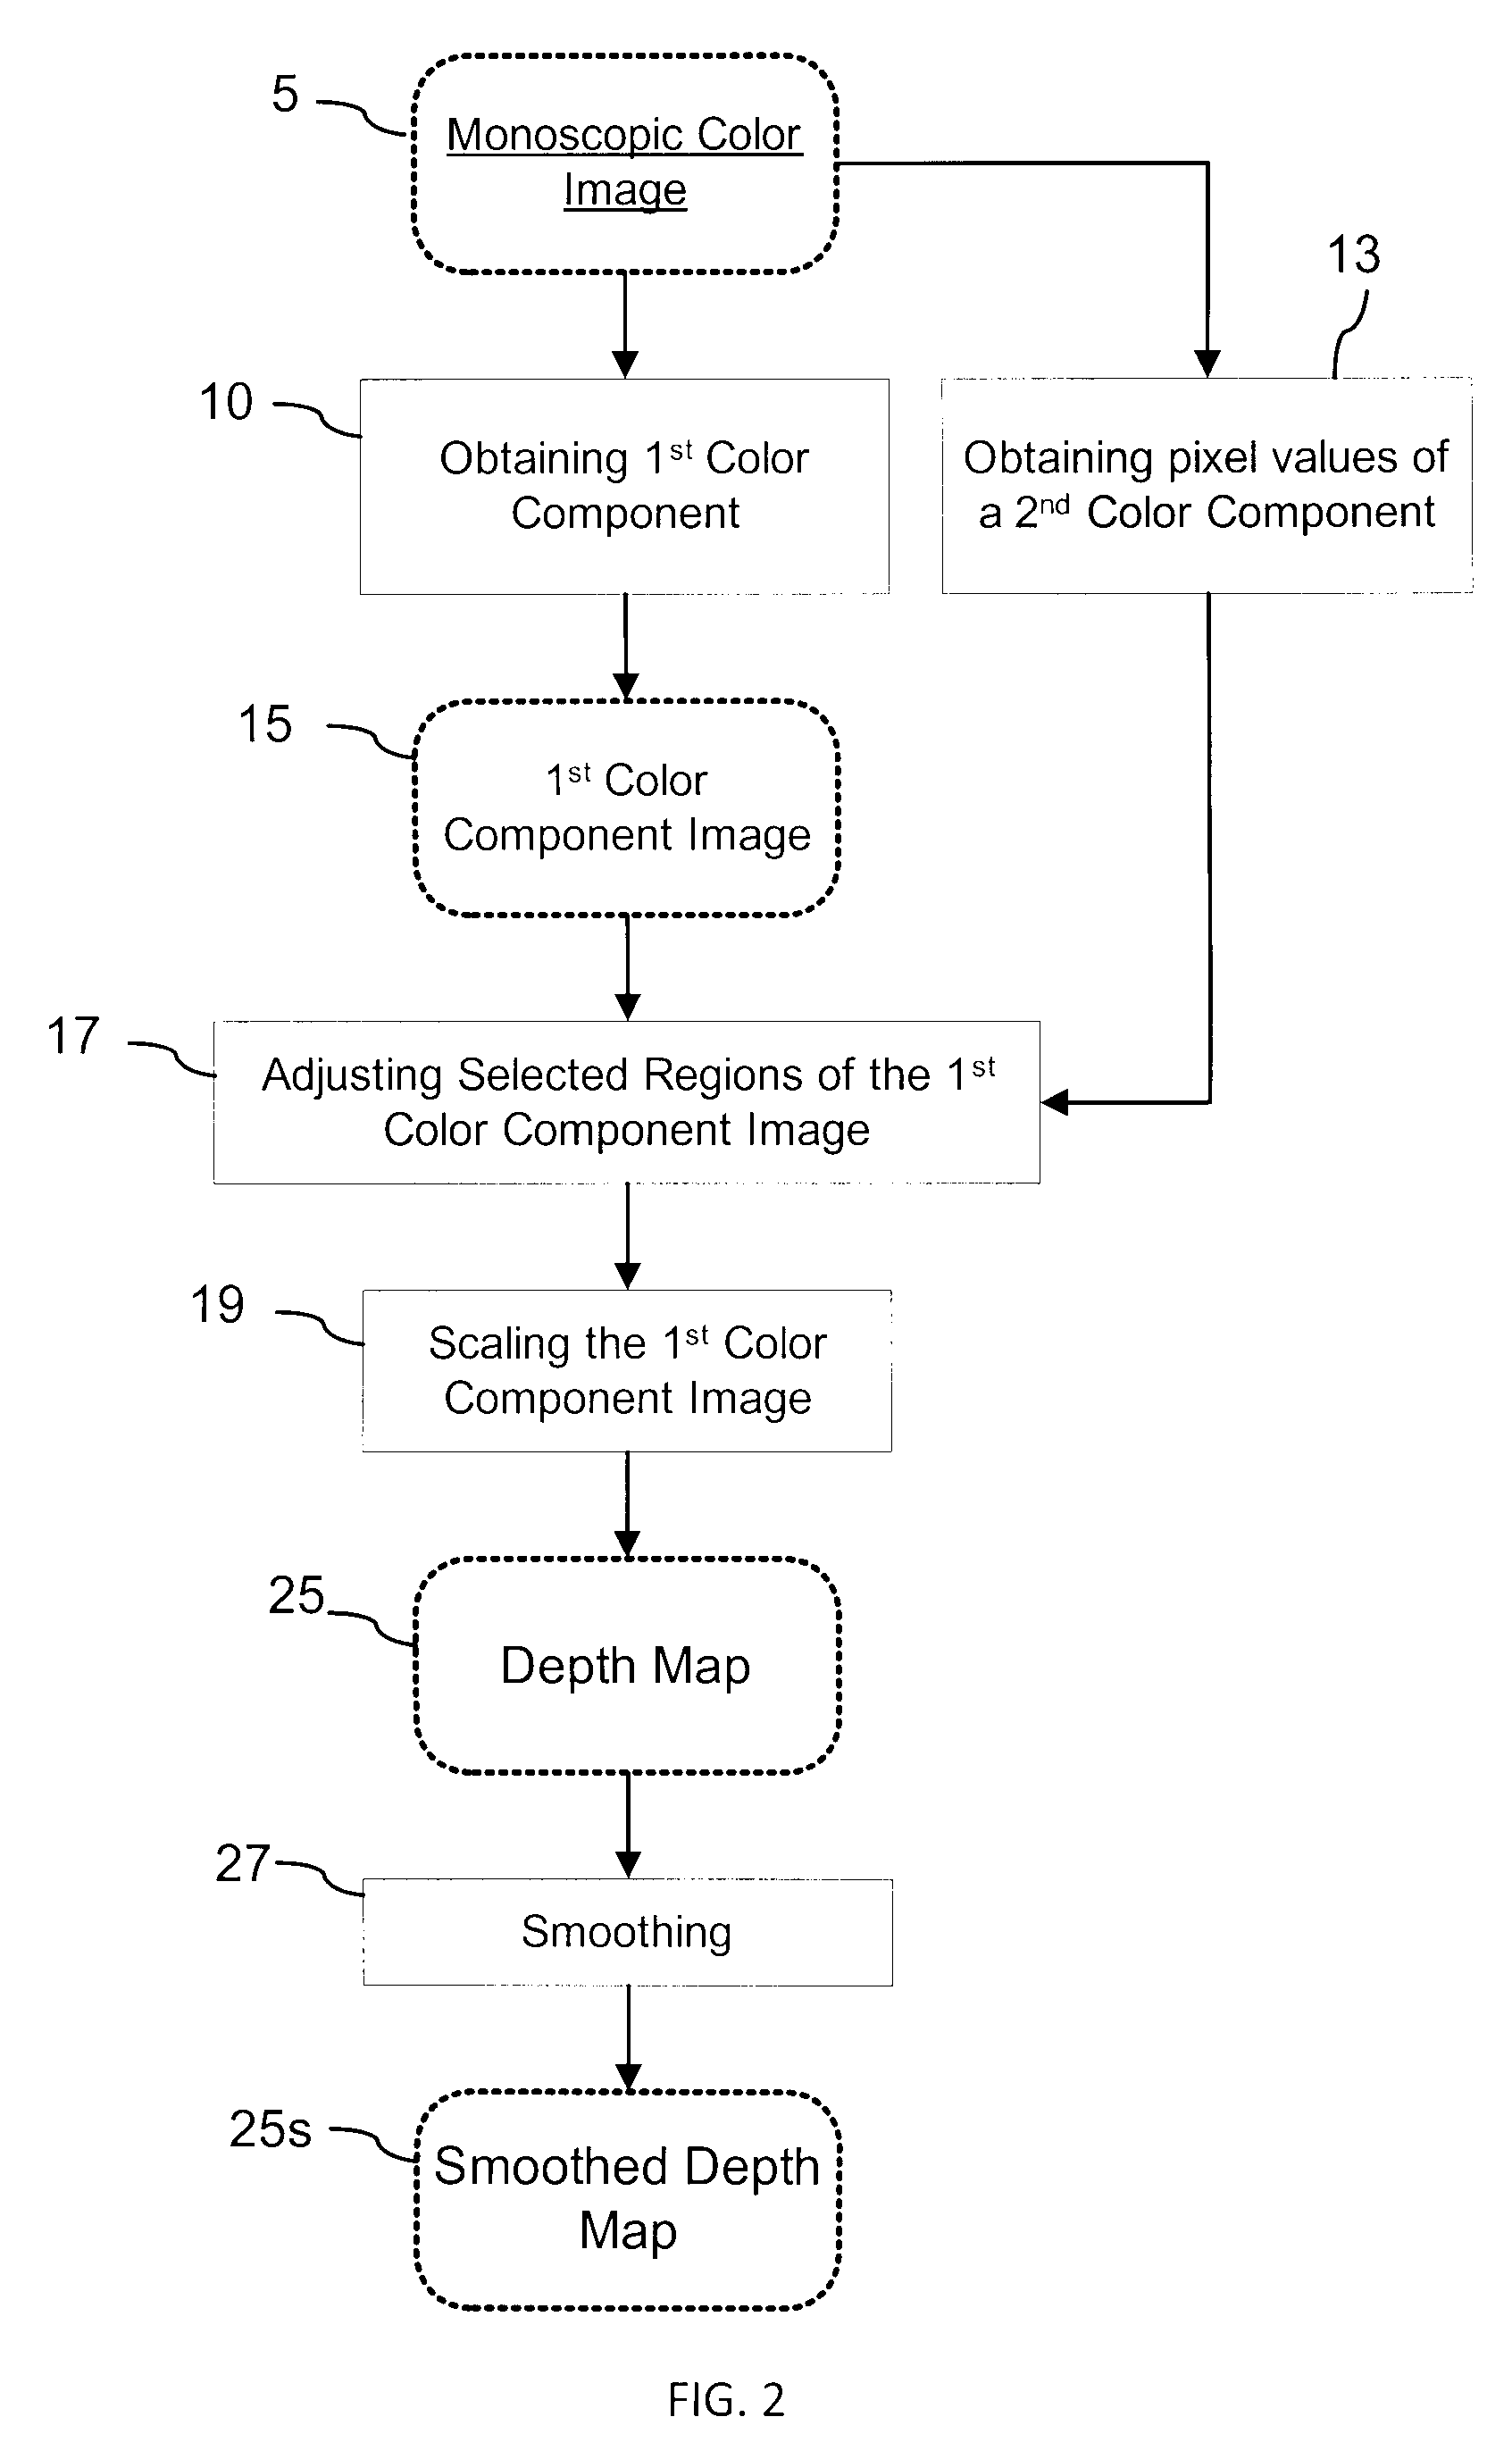 Generation of a depth map from a monoscopic color image for rendering stereoscopic still and video images